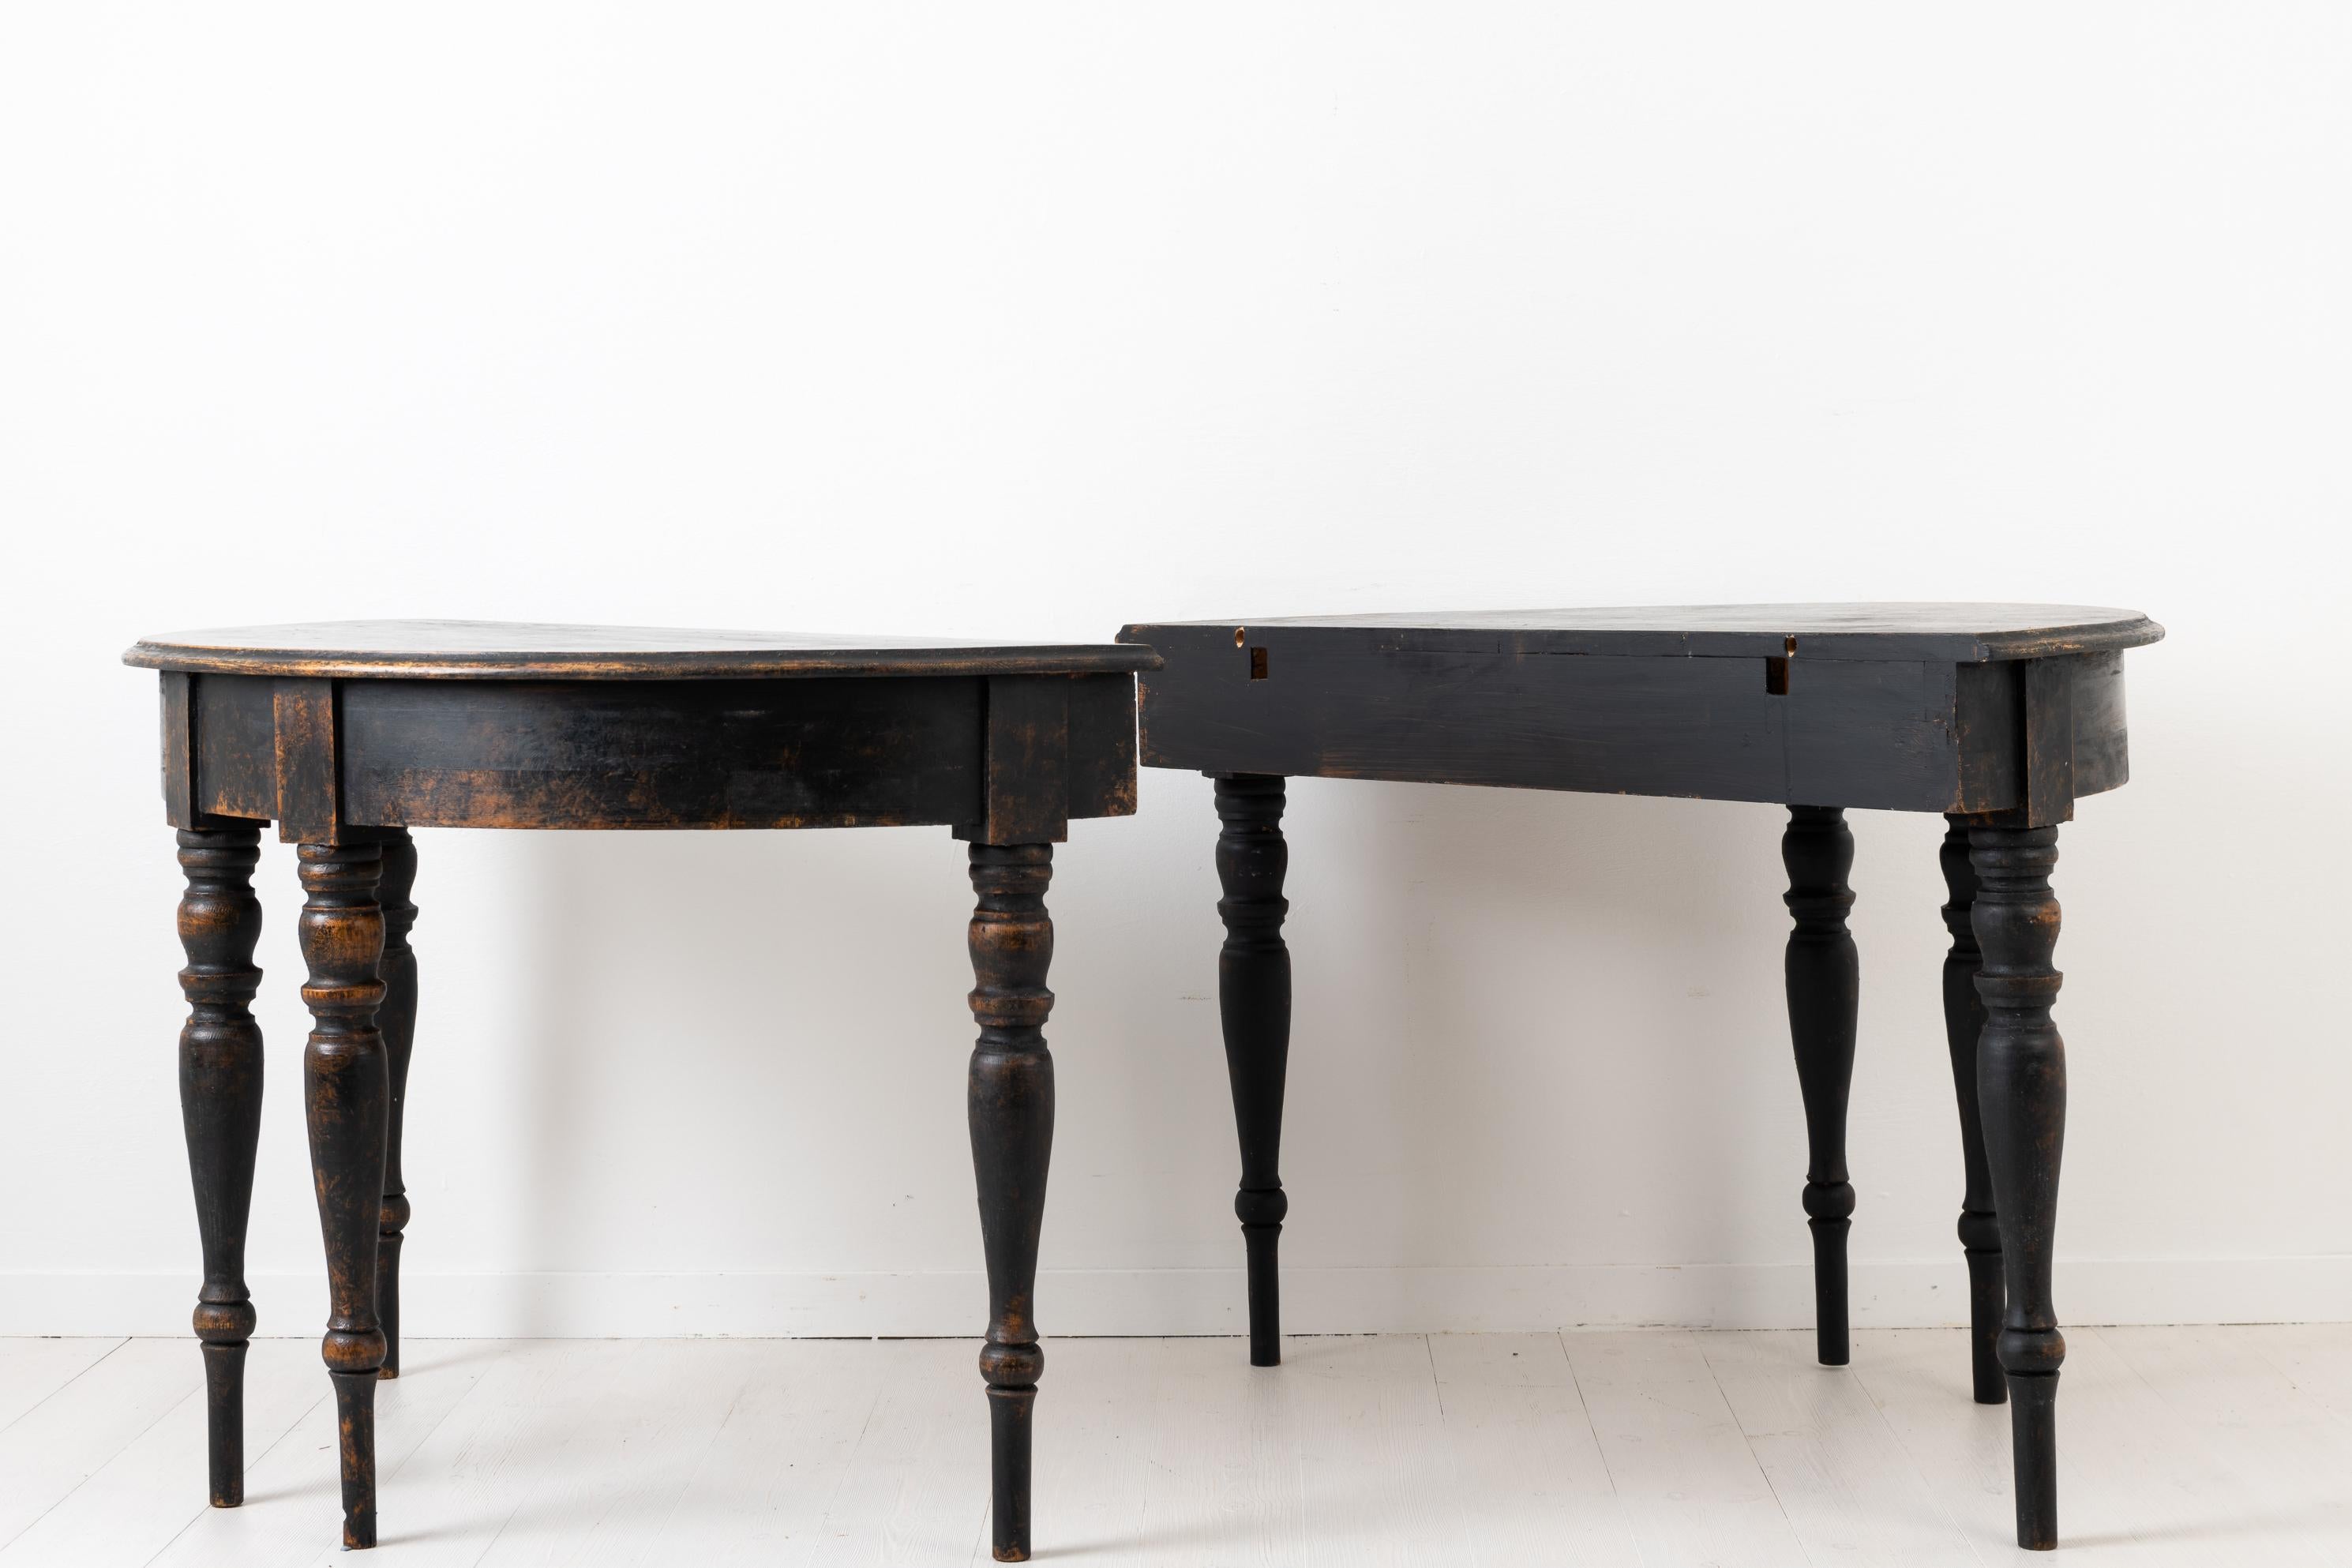 Hand-Crafted Swedish Rustic Black Demilune Tables